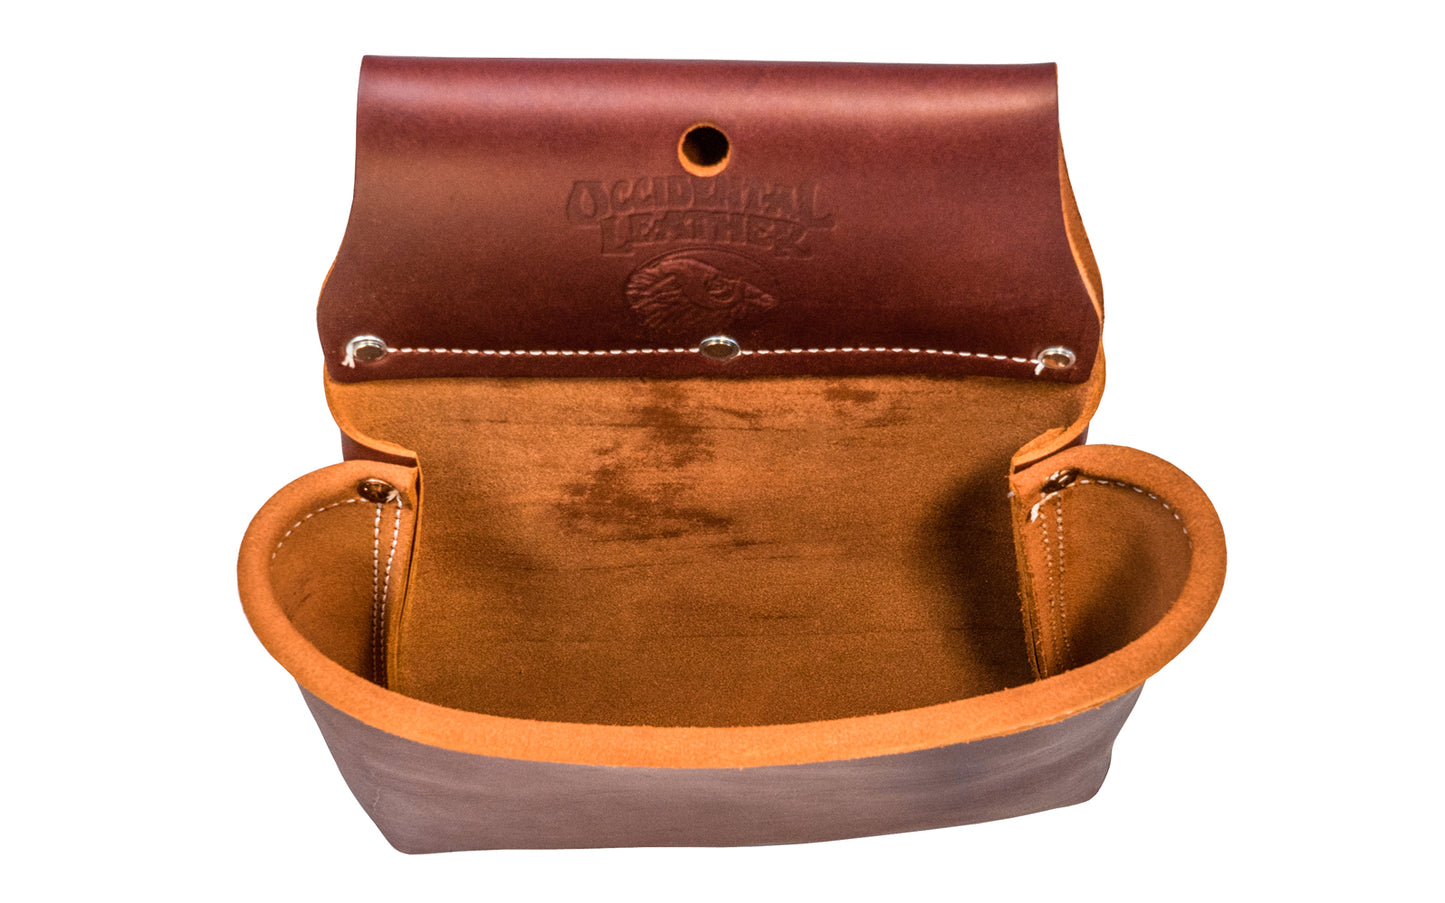 Occidental Leather Large Pouch ~ Model 5024 - Fits a 3" work belt - Pouch - Utility Bag - Made of genuine leather - Made in USA - Single Leather Bag - Tool Bag - 759244007800 - Occidental Leather's largest single pouch all leather bag. Extra large deep bag without tool holders. - Occidental one pocket bag - One Pouch